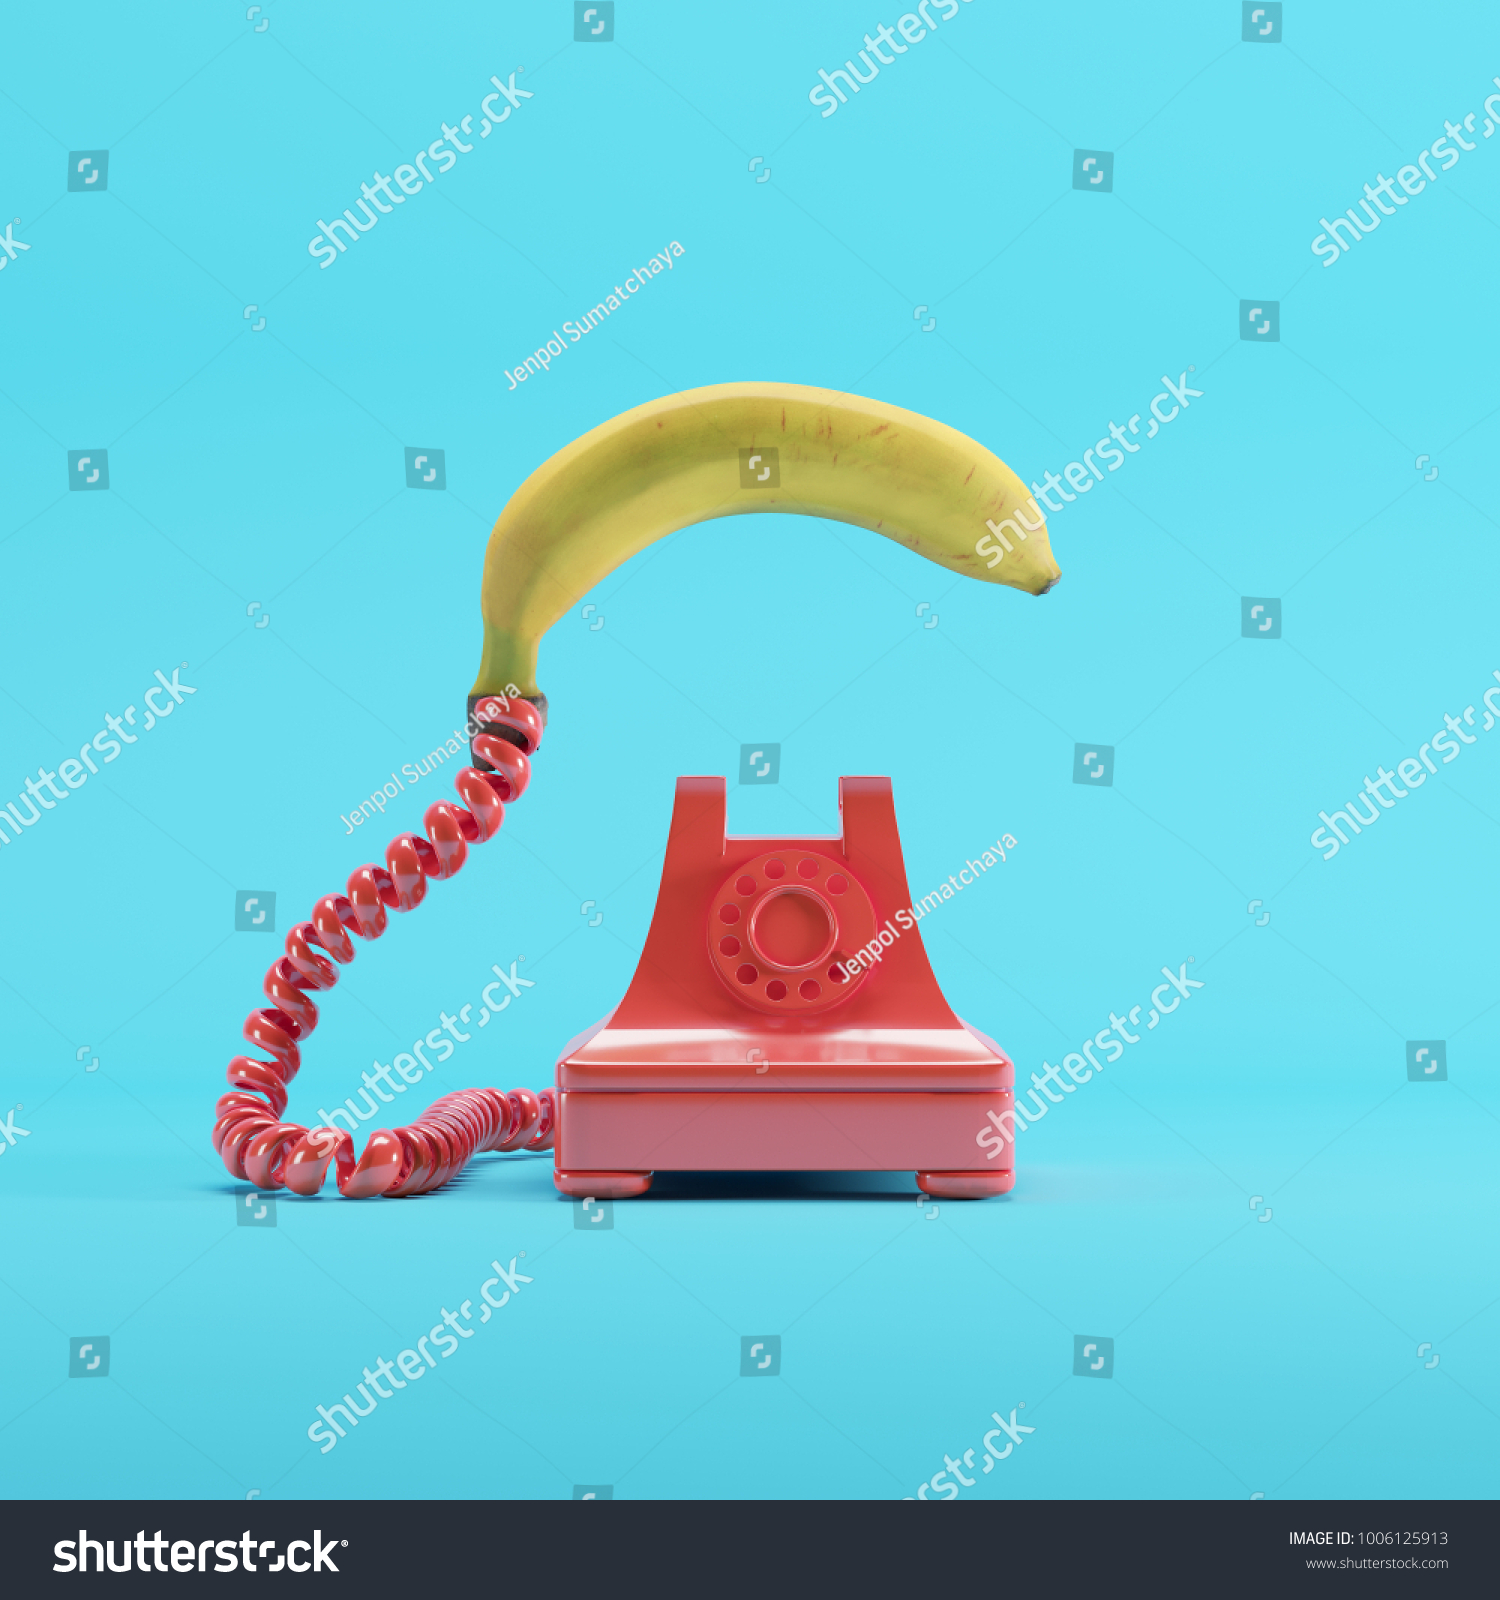 Banana phone with red vintage telephone on blue pastel color background. minimal idea concept. #1006125913